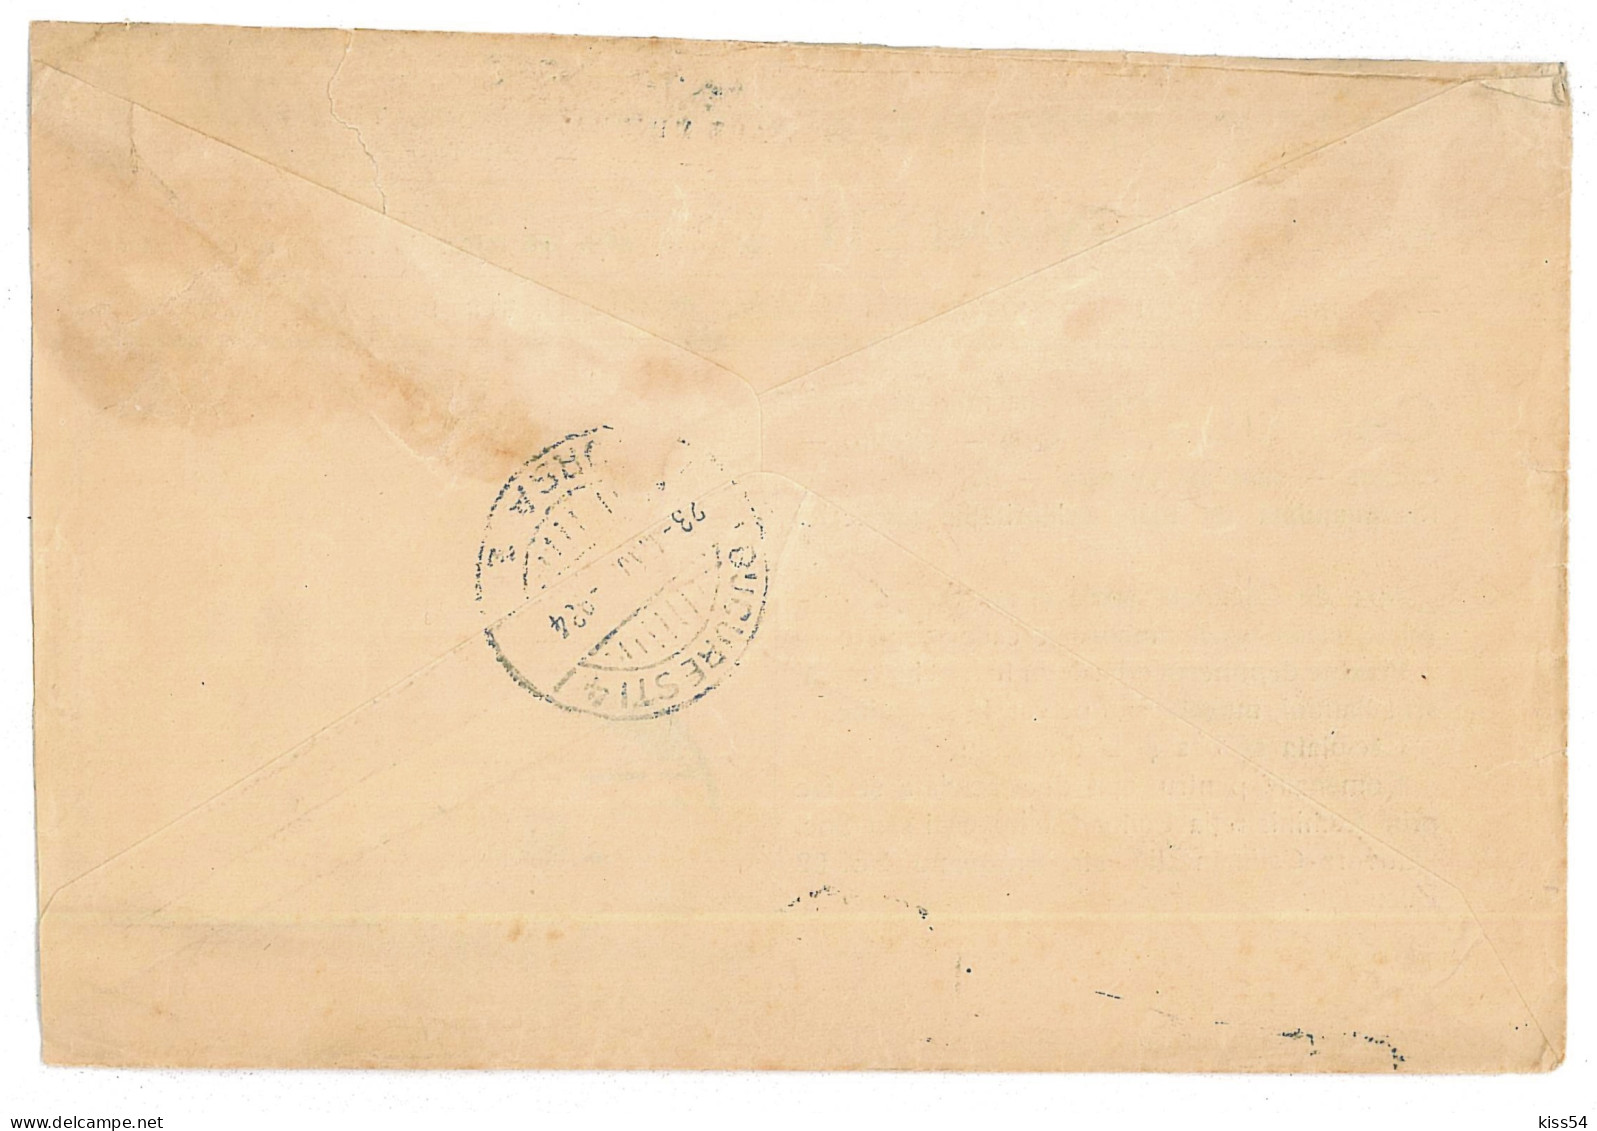 CIP 22 - 170-a Bucuresti, RECLAMA Mineral Water, GOVORA, CALIMANESTI - Cover - Used - 1934 - Covers & Documents